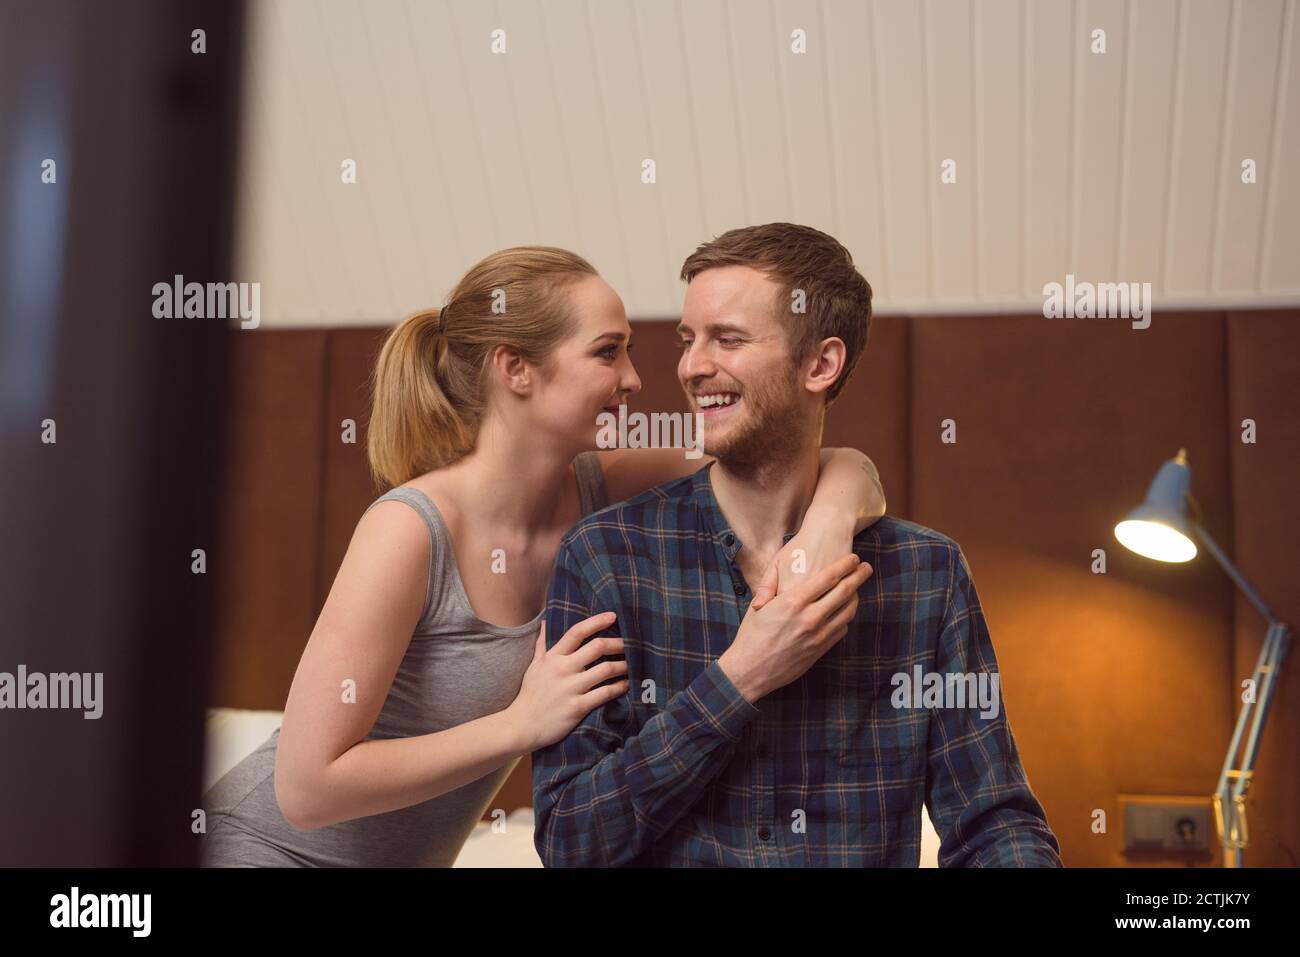 Young woman embracing happy boyfriend while sitting on bed in evening together Stock Photo